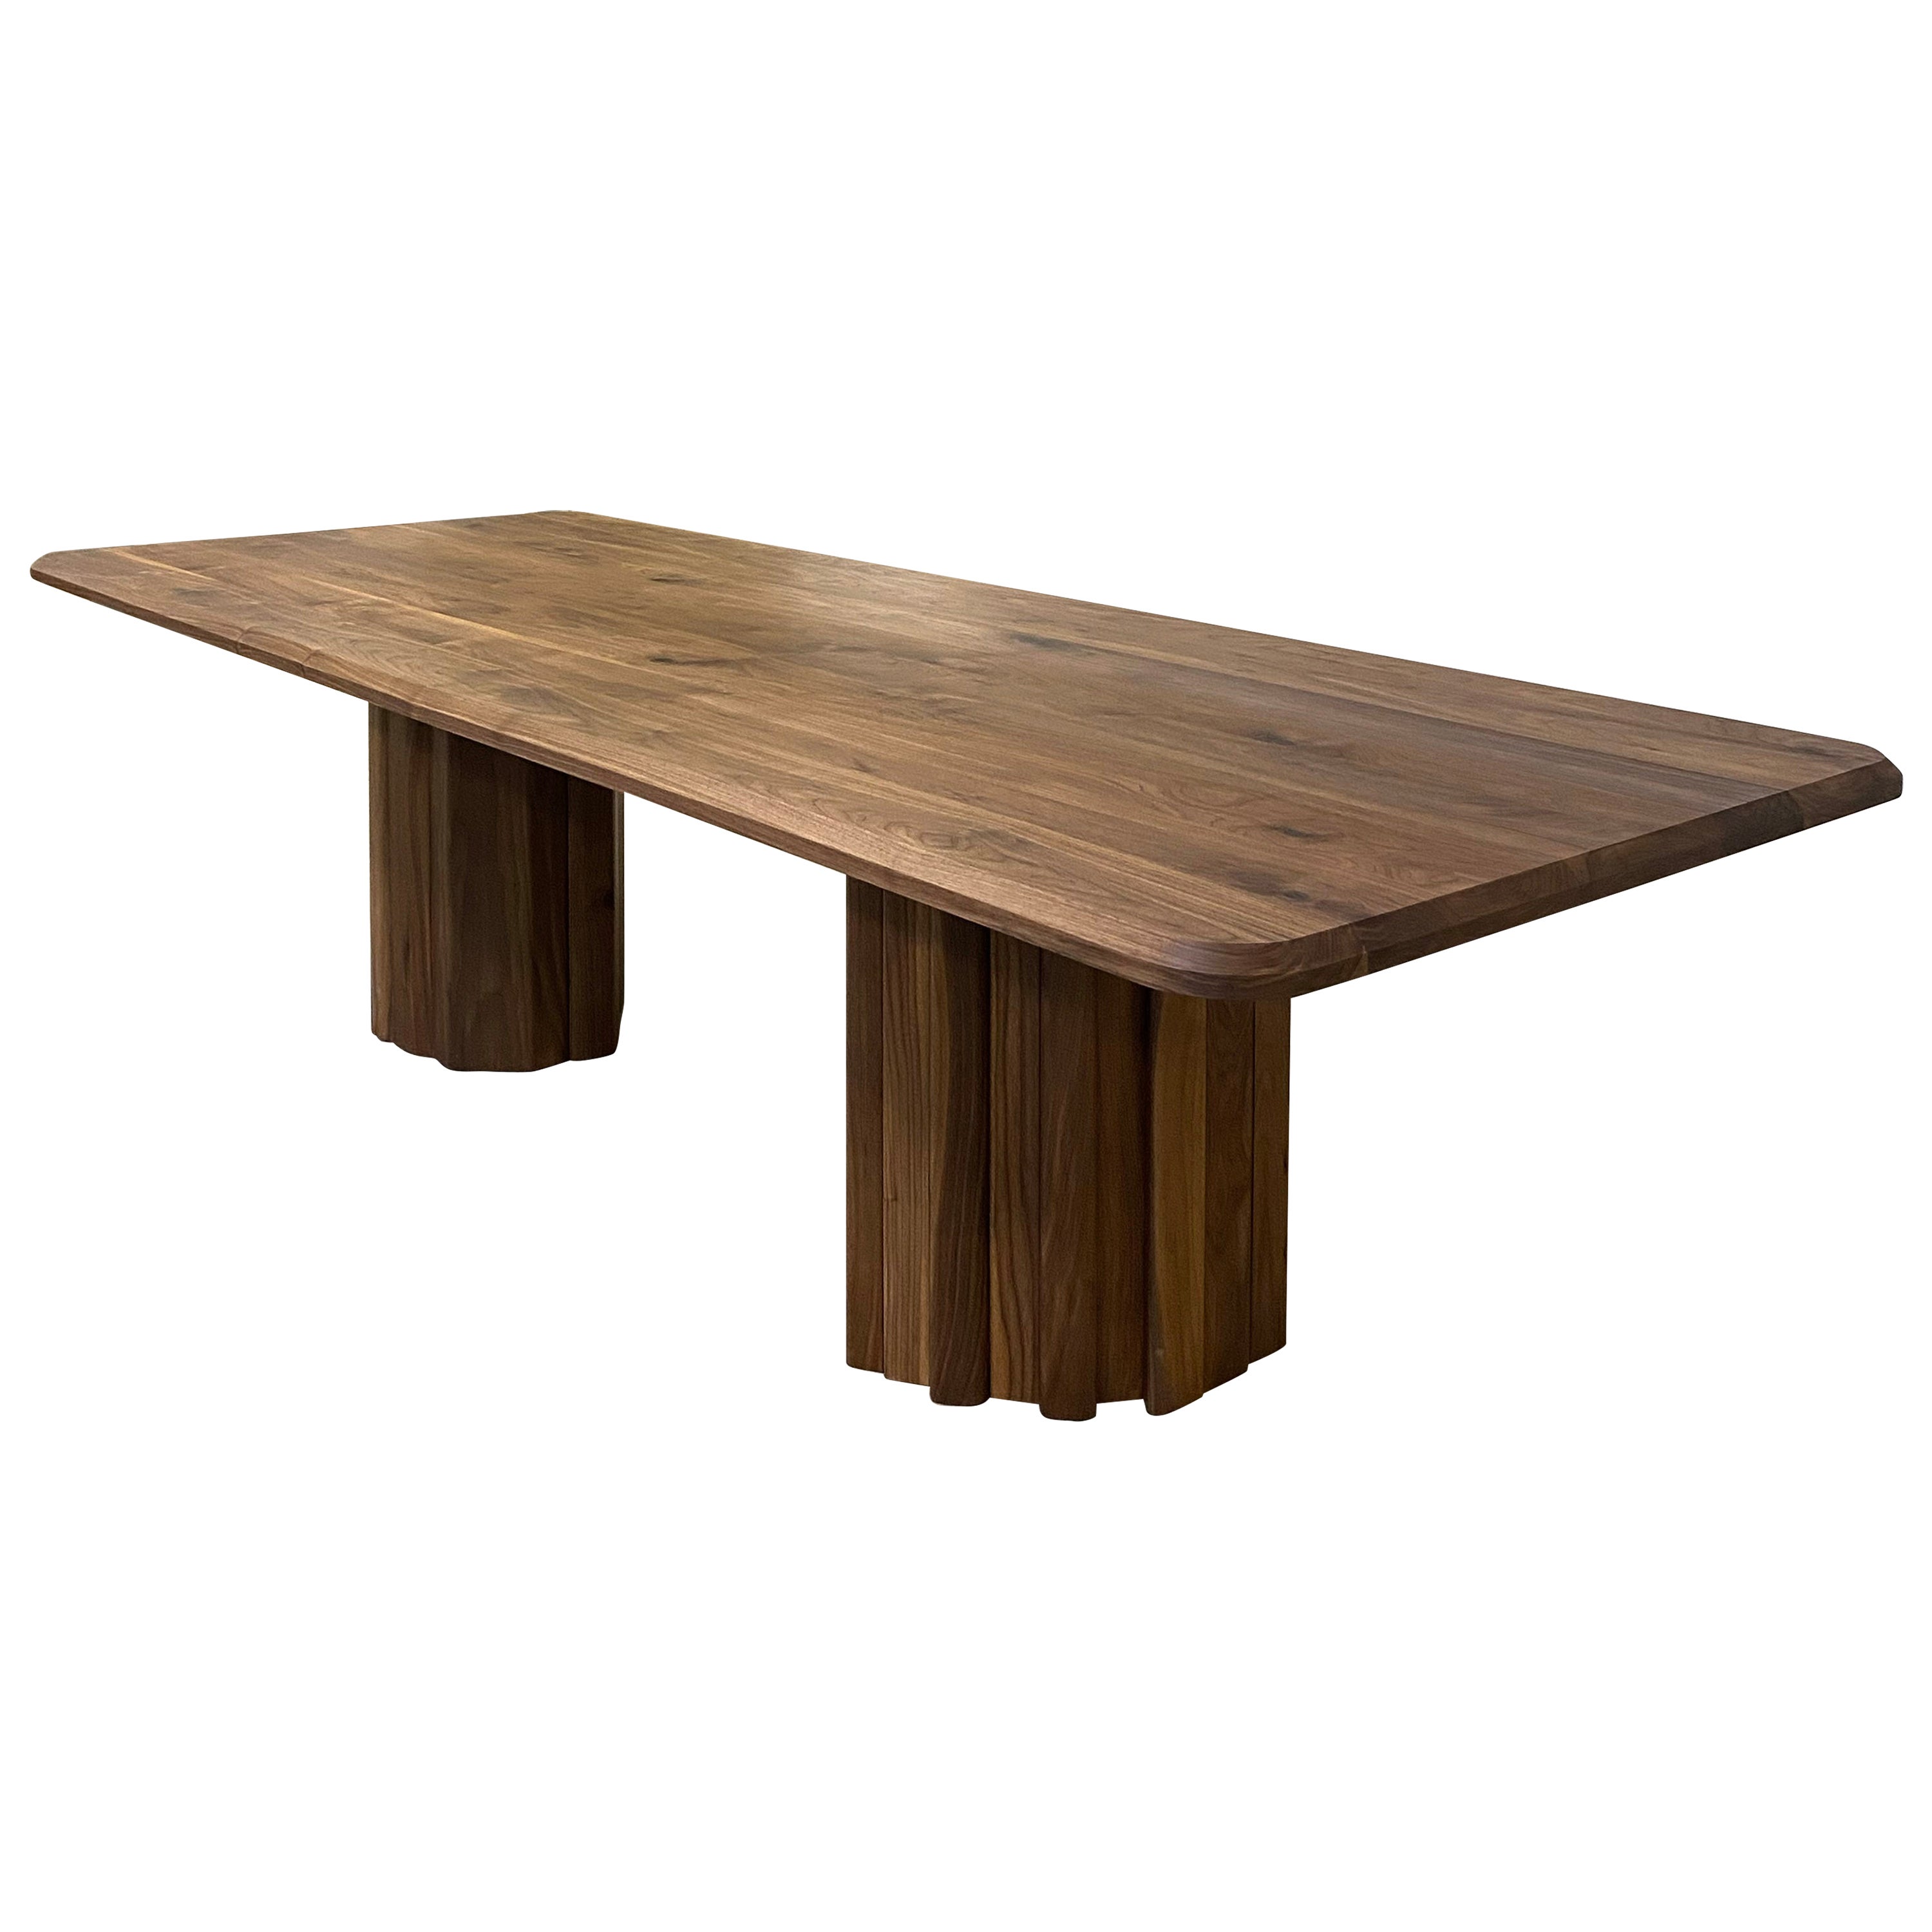 Handcrafted Oiled Walnut Geomorph Dining Table 96"L, Mary Ratcliffe Studio For Sale